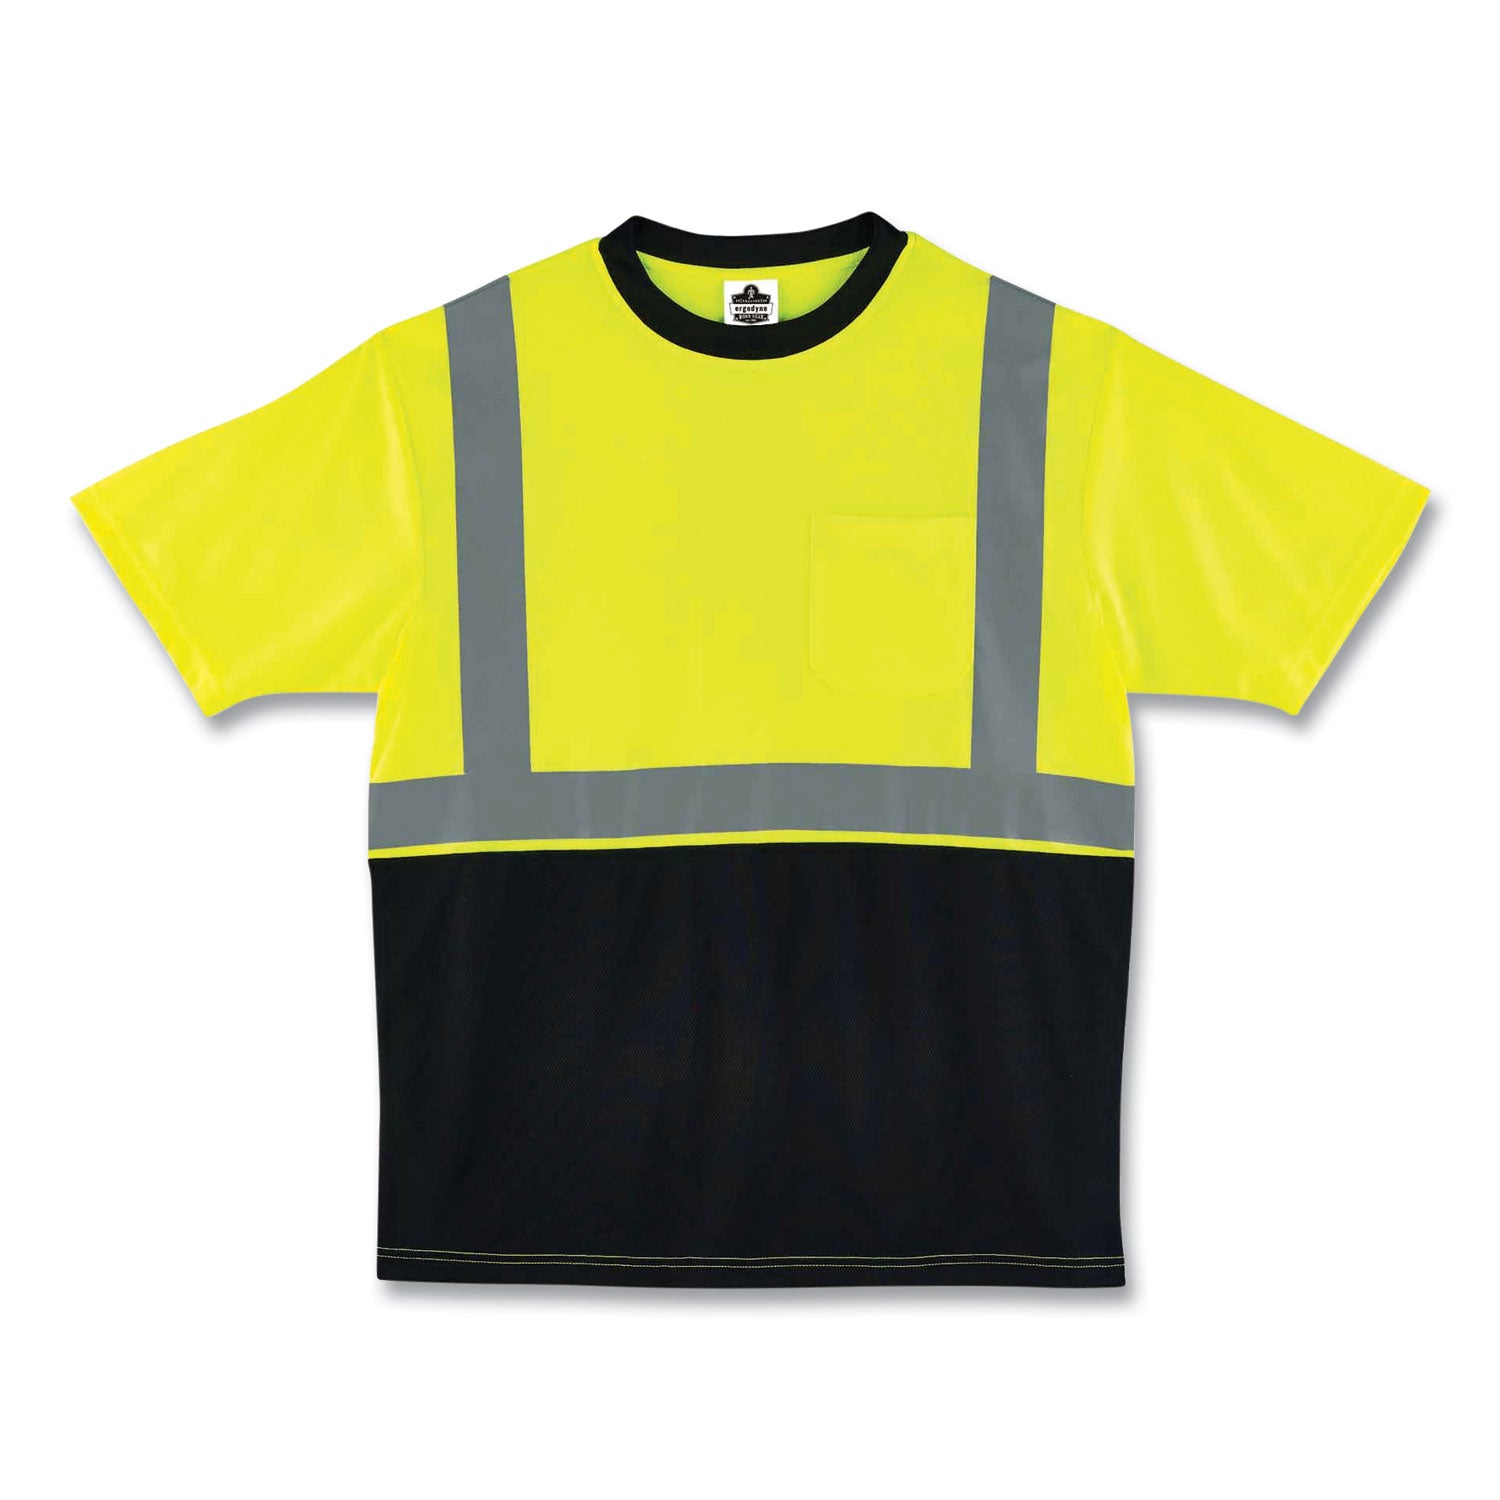 glowear-8289bk-class-2-hi-vis-t-shirt-with-black-bottom-small-lime-ships-in-1-3-business-days_ego22502 - 1